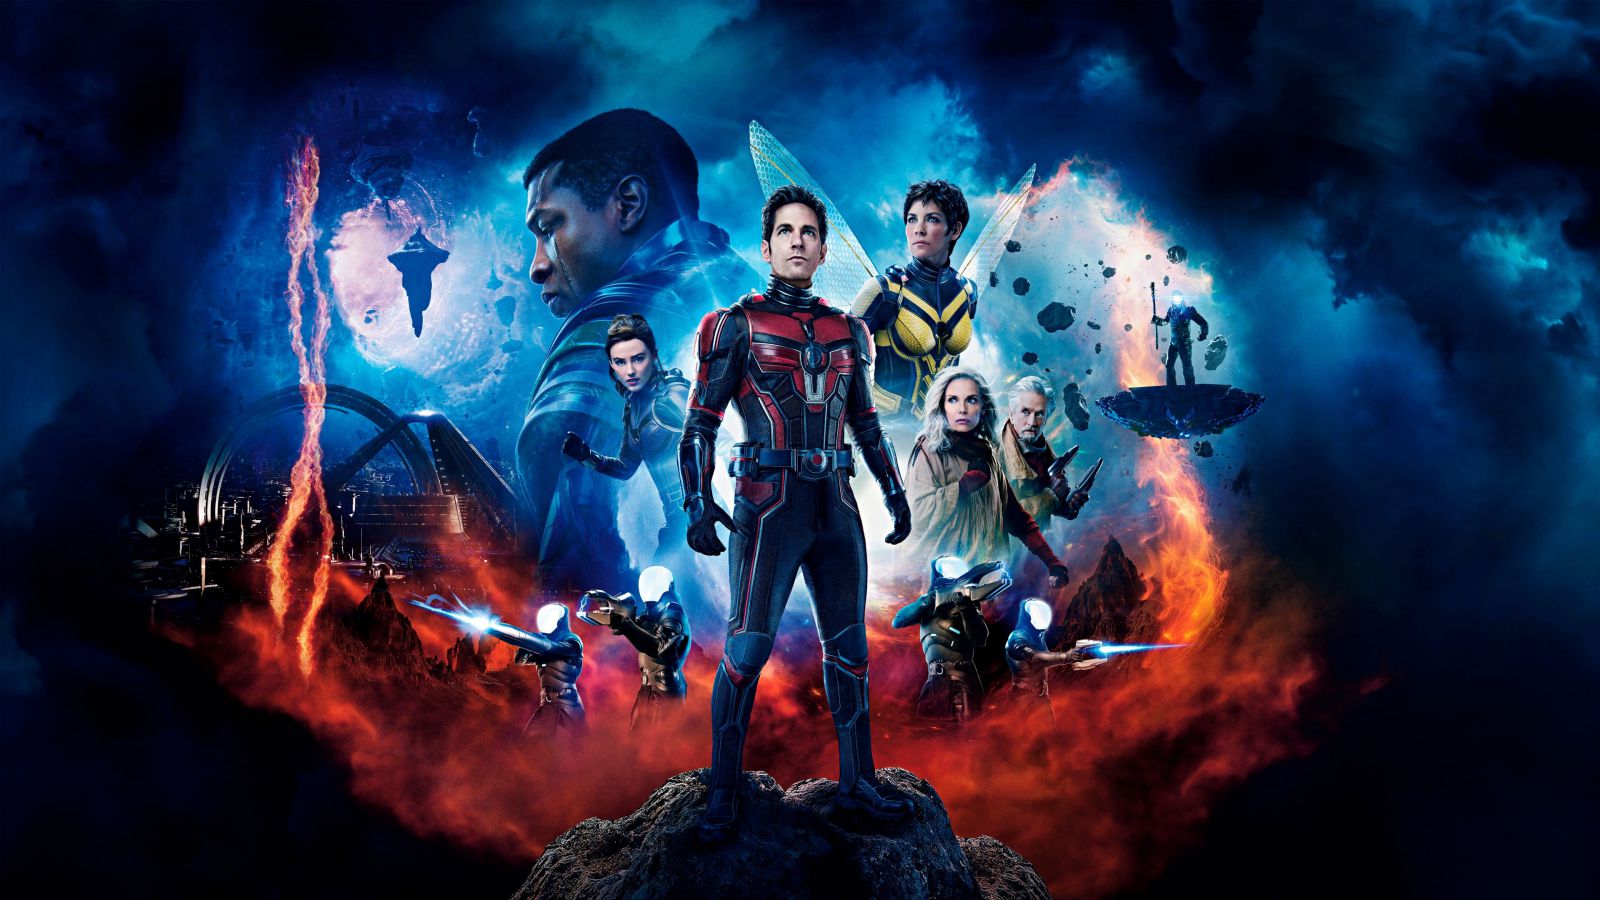 Watch Movie Ant-Man and the Wasp: Quantumania (2023) Full Movie Free Online